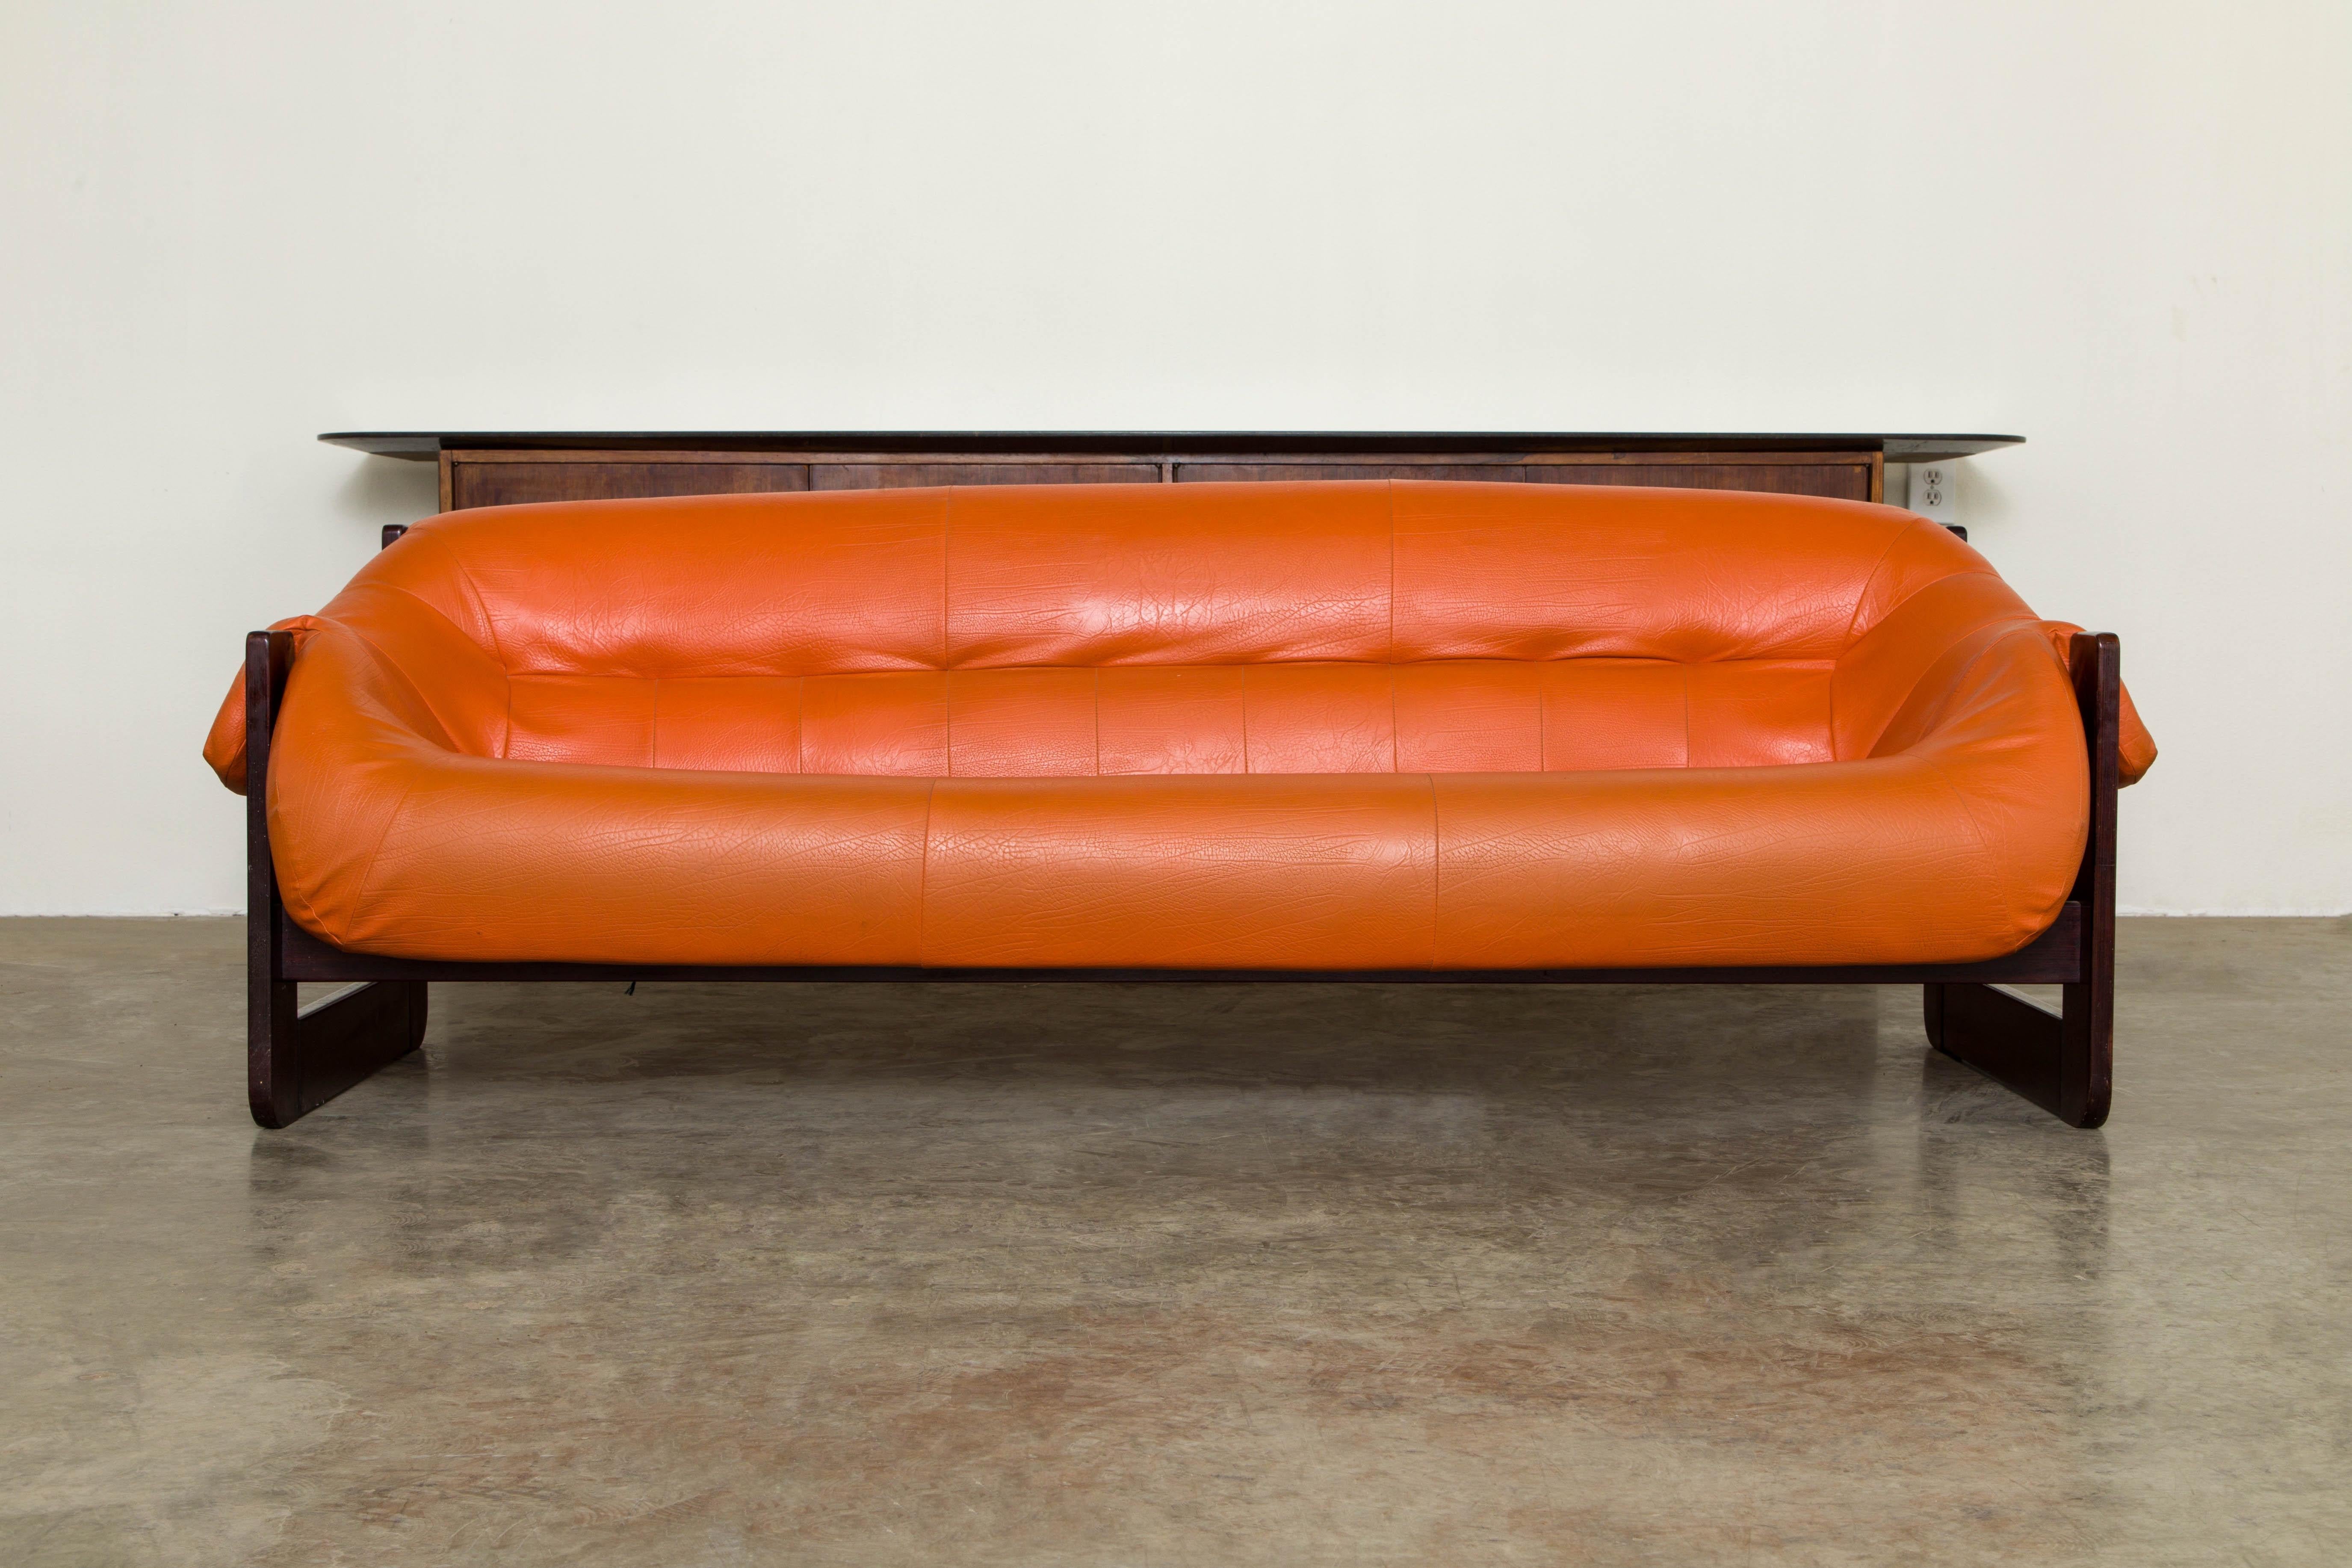 This gorgeous MP-97 three-seat sofa by Brazilian designer Percival Lafer for Lafer MP was designed in 1970, this example an early production made for Brazil. Featuring a Rosewood frame that supports the original leatherette cushion in a beautiful